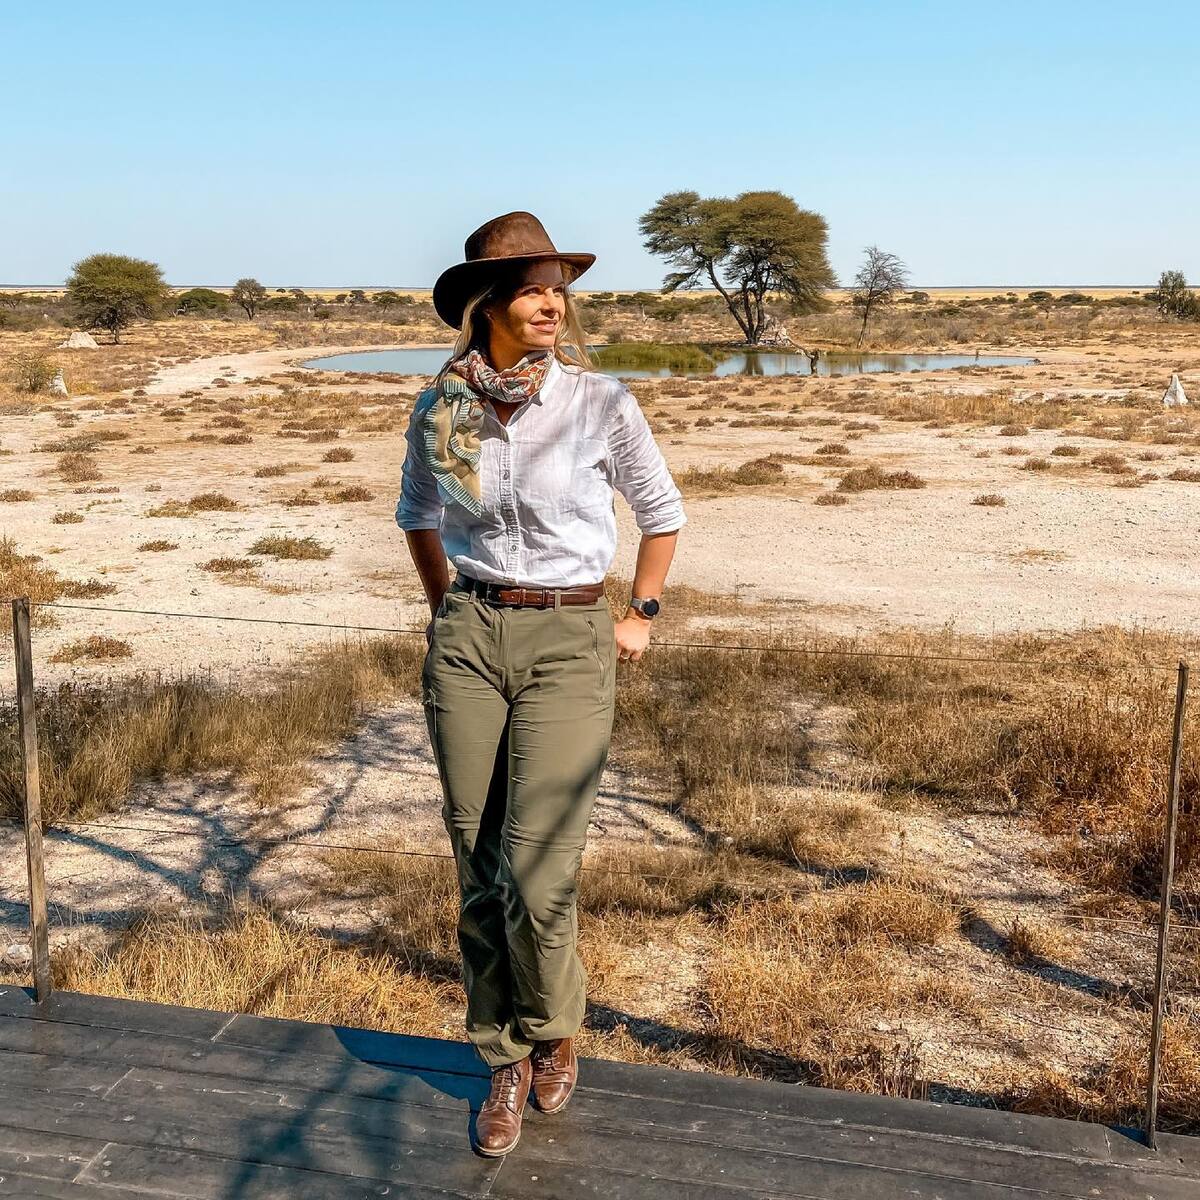 Myth 6: Women should not travel alone in Namibia